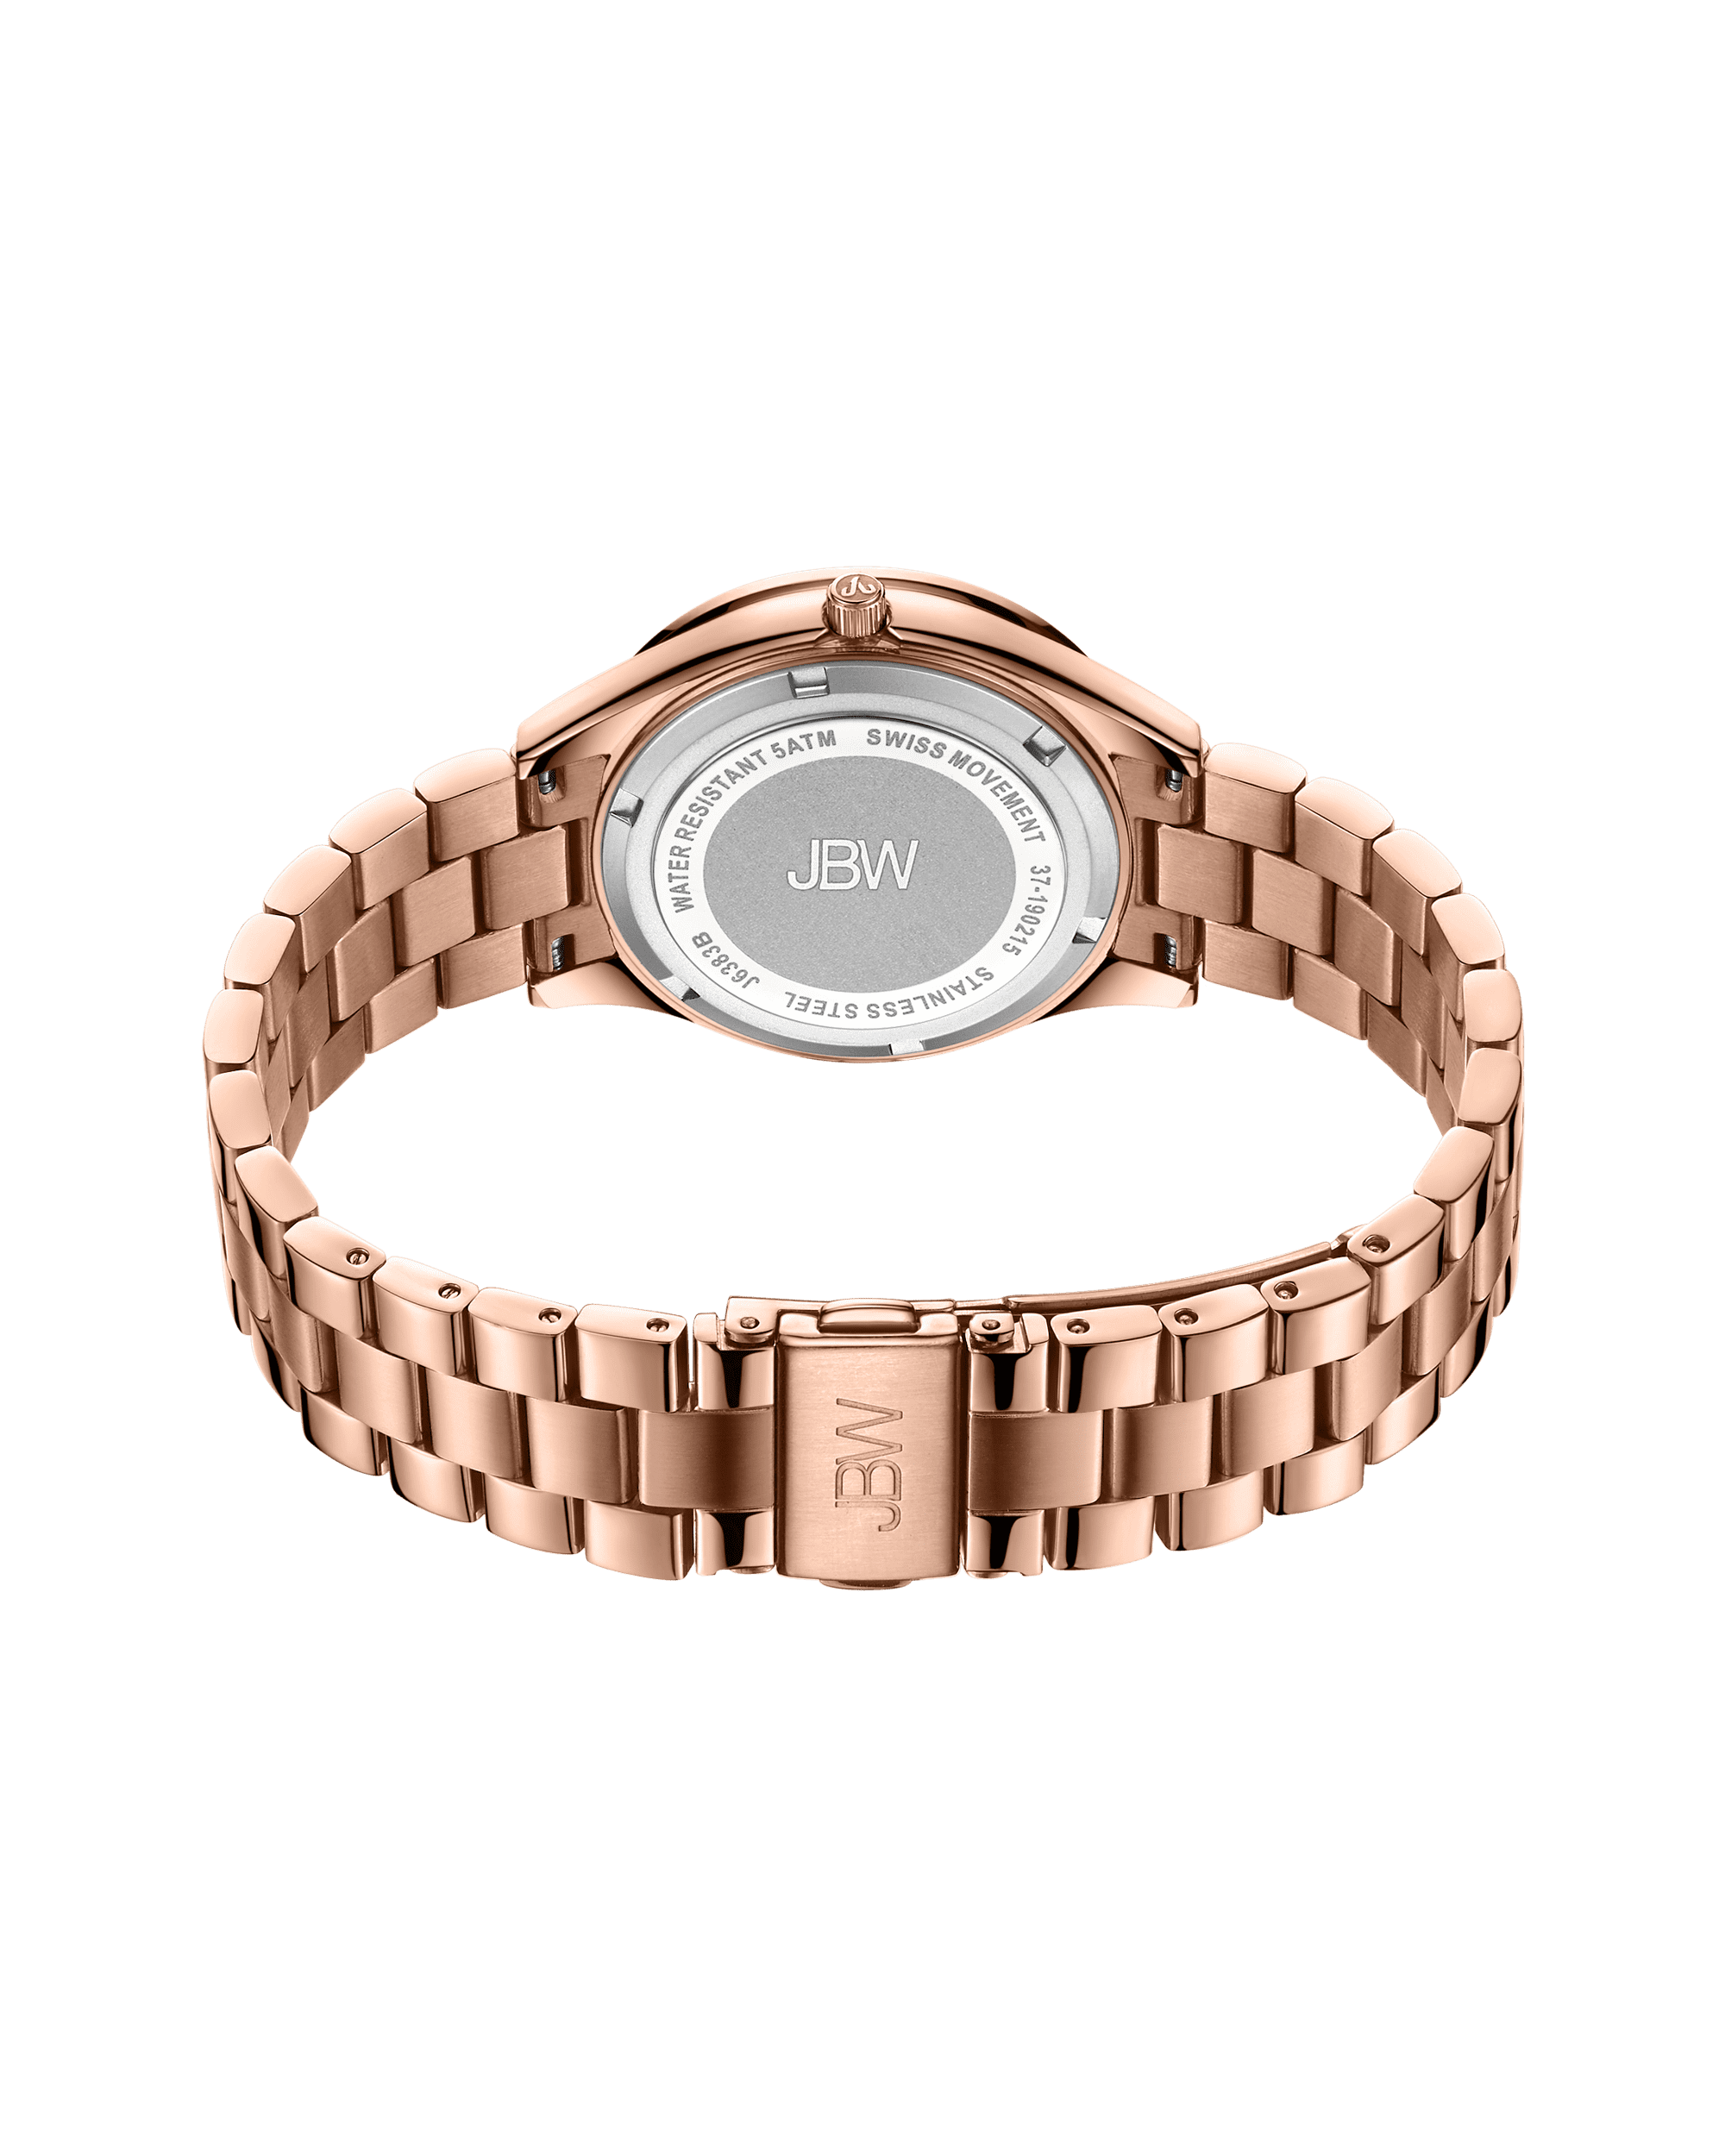 Women's Rose Gold-Tone Watches | GUESS